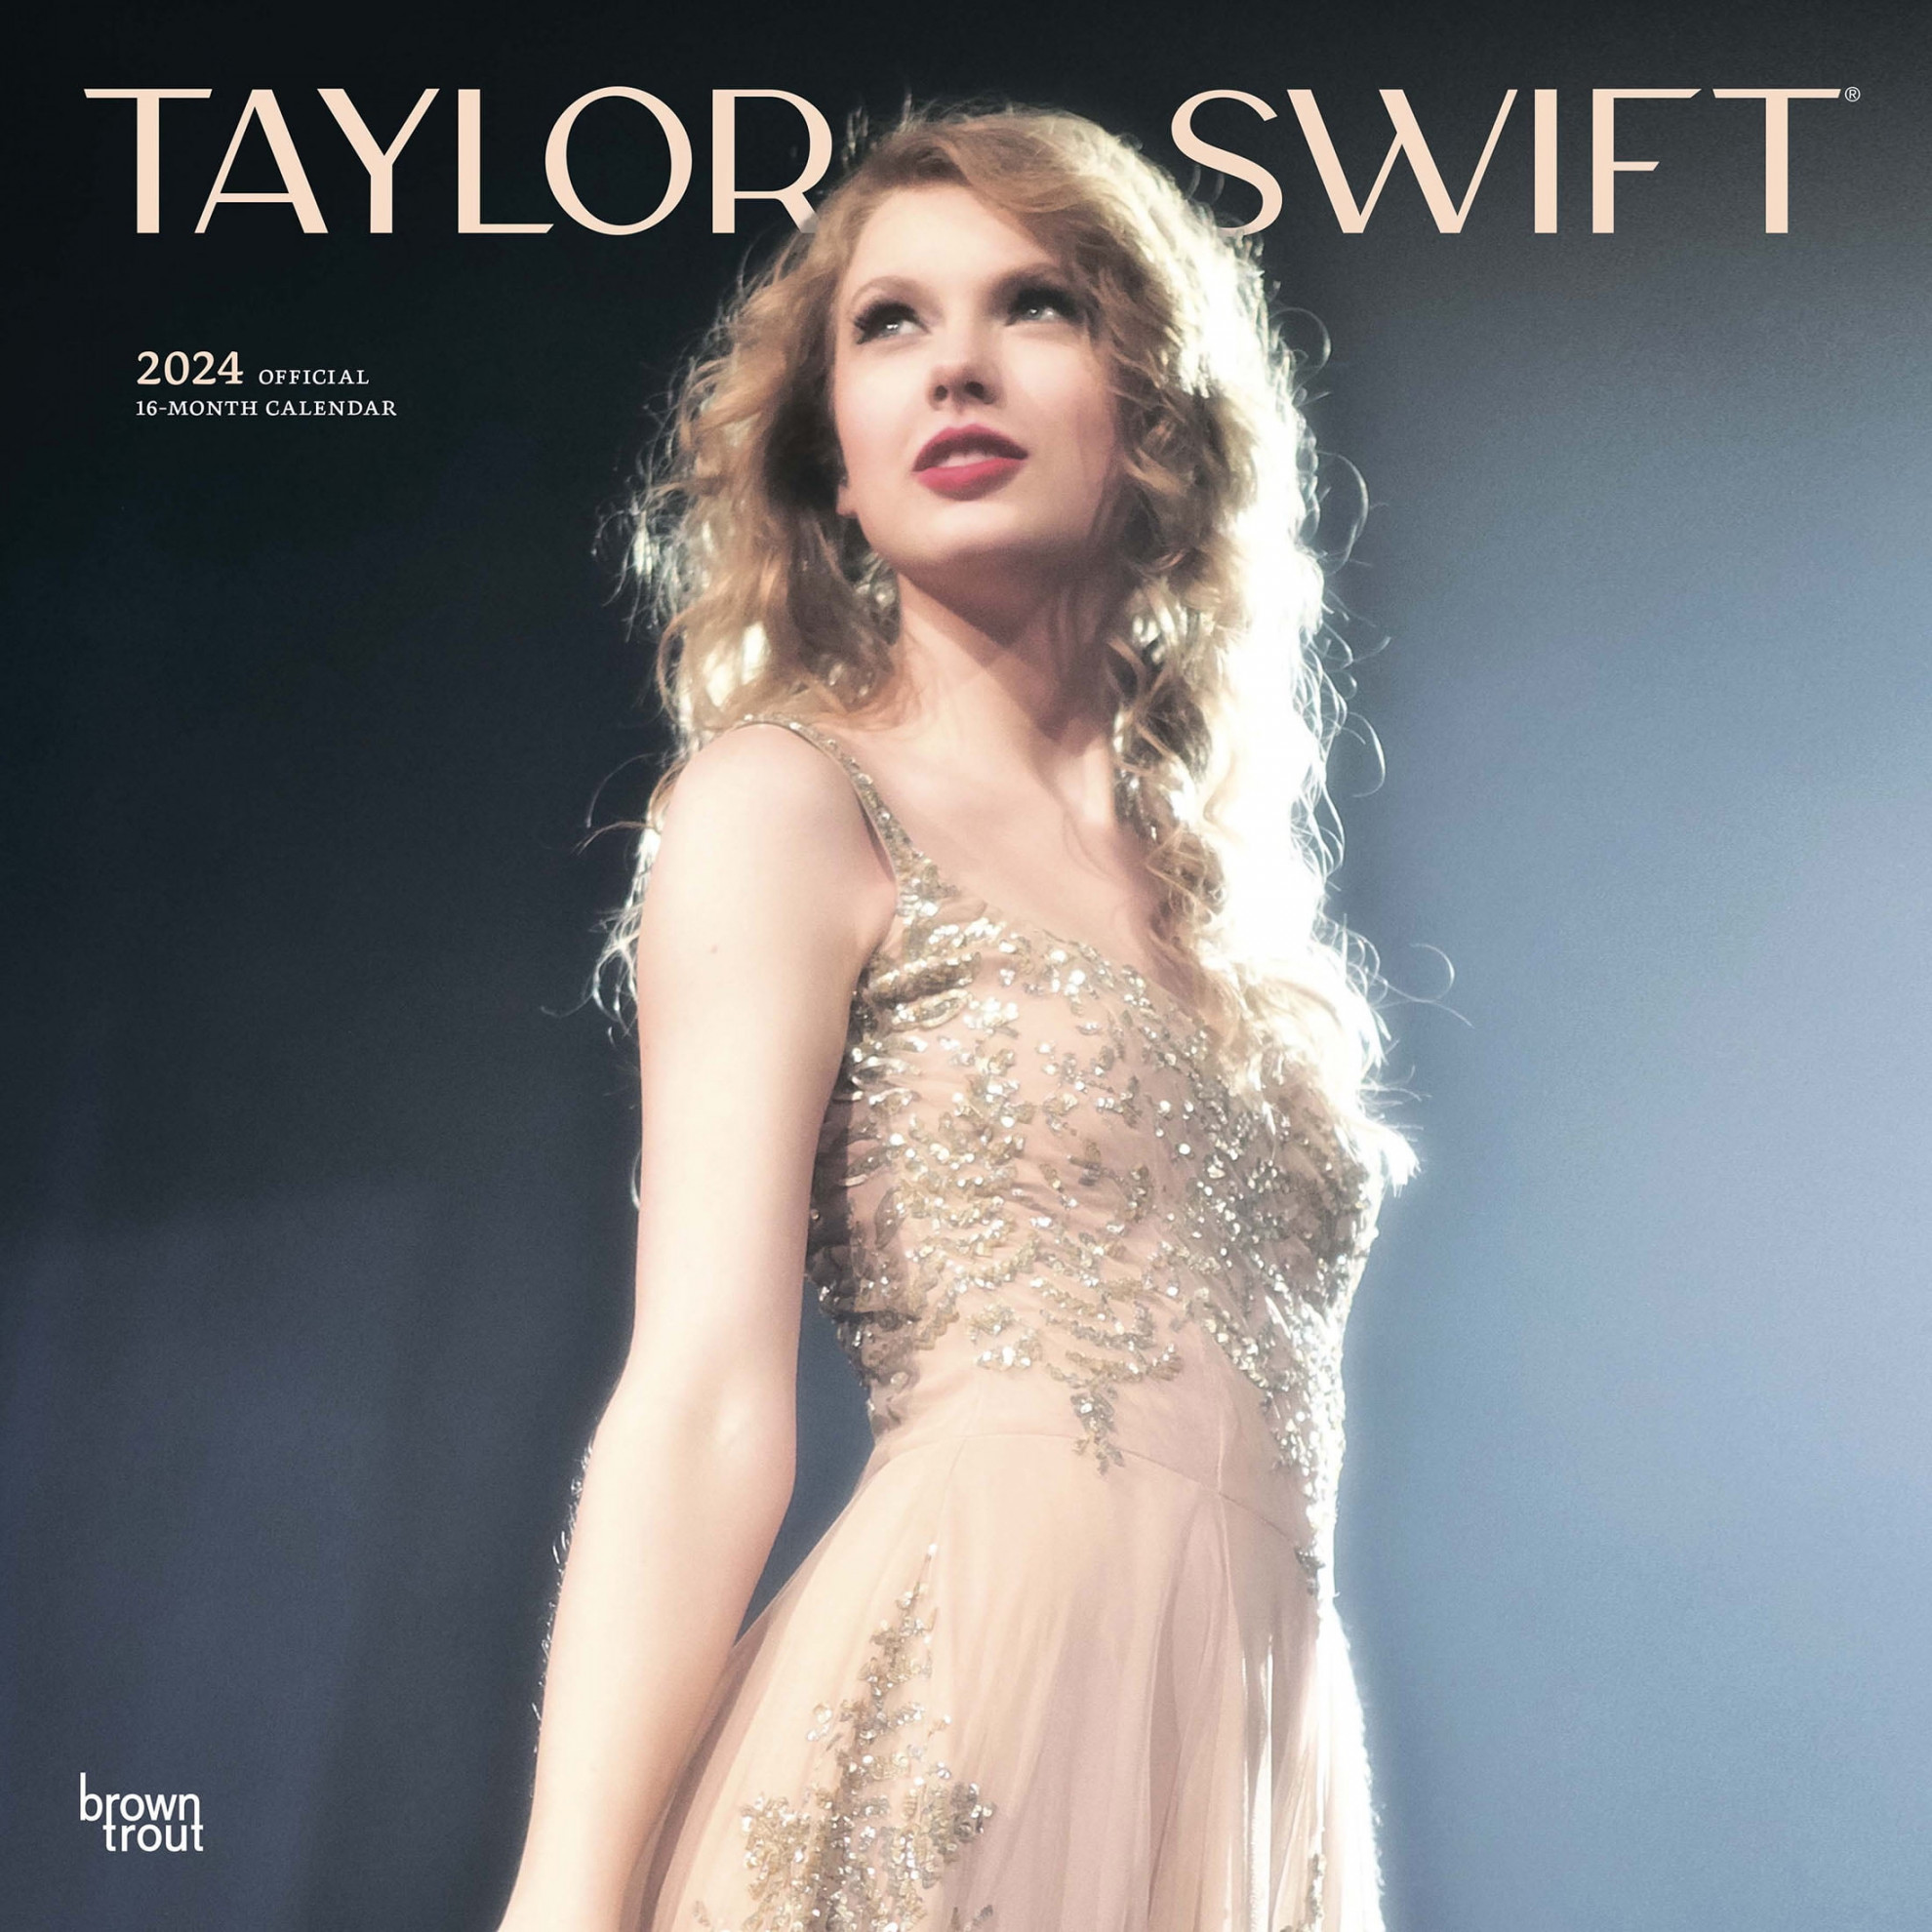 Taylor Swift OFFICIAL   x" (Hanging) Wall Calendar  BrownTrout